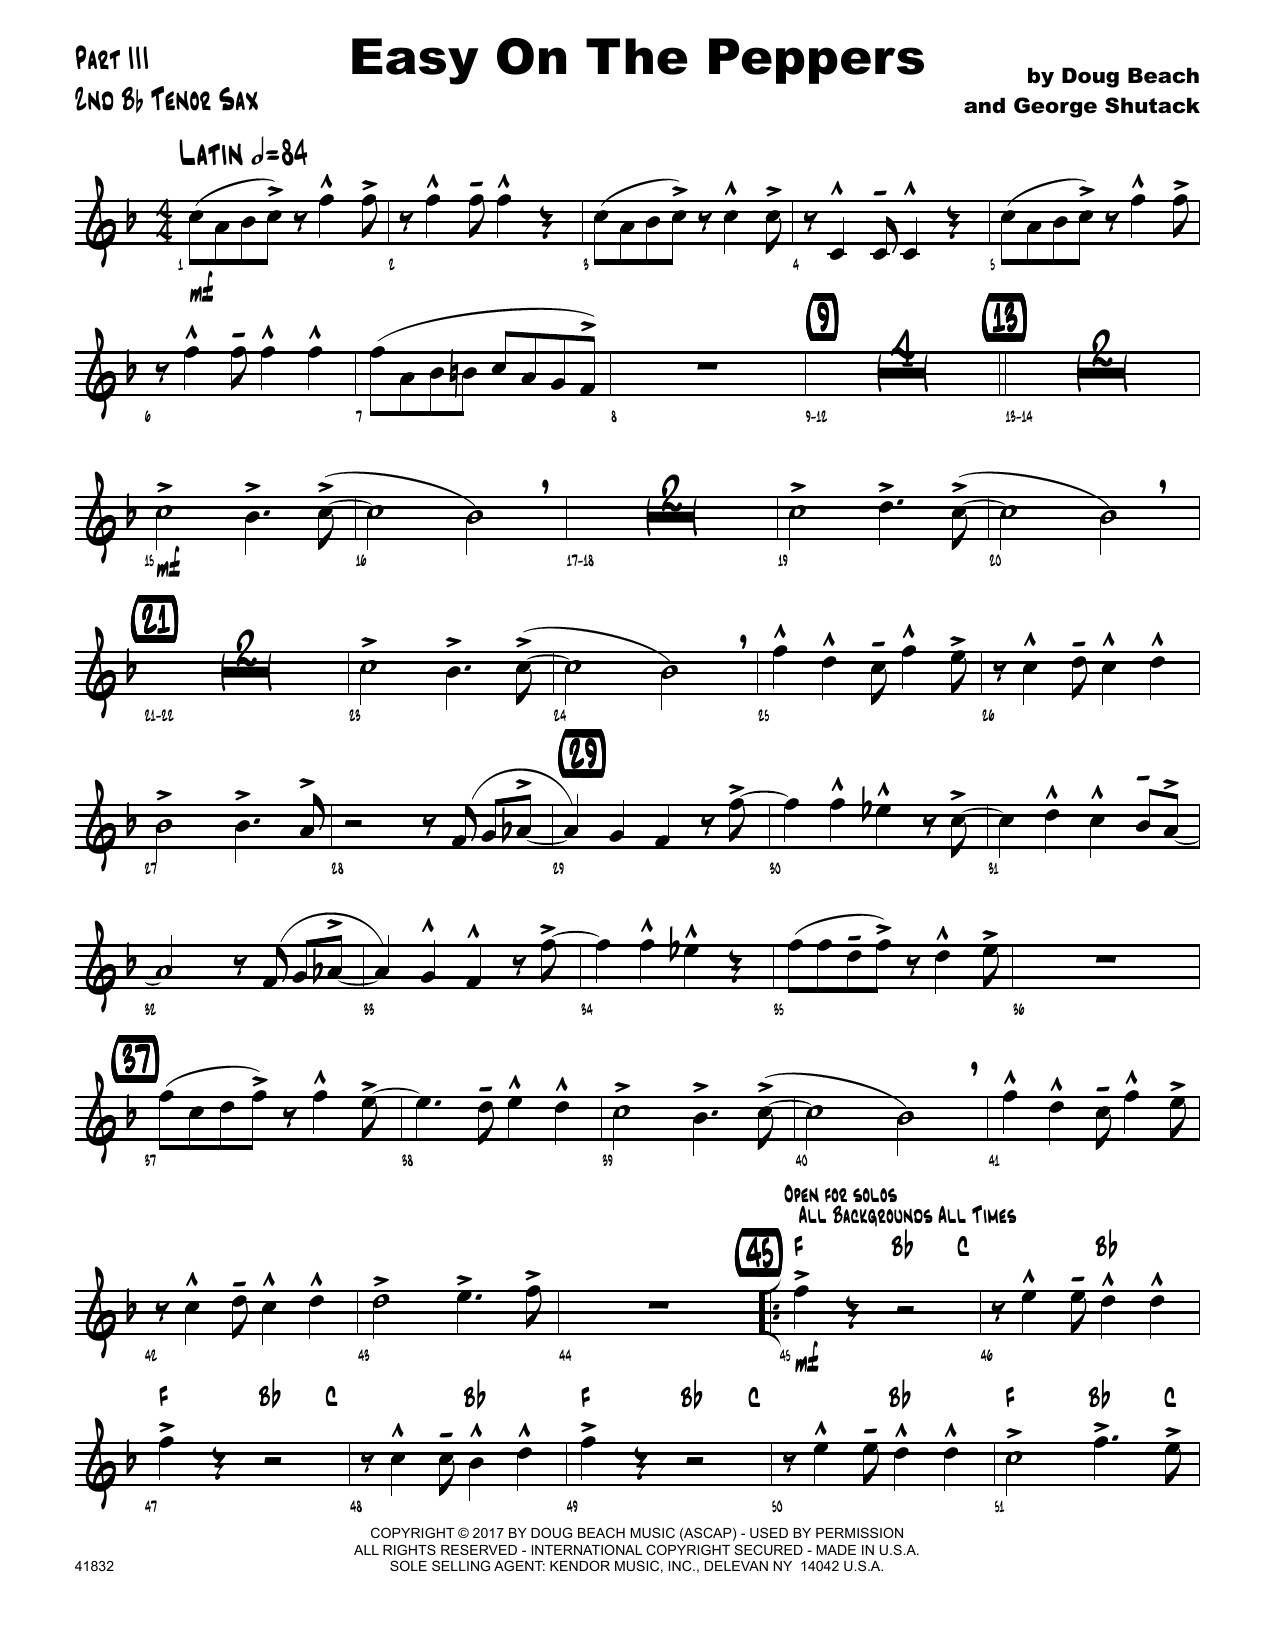 Download Doug Beach & George Shutack Easy On The Peppers - 2nd Bb Tenor Saxo Sheet Music